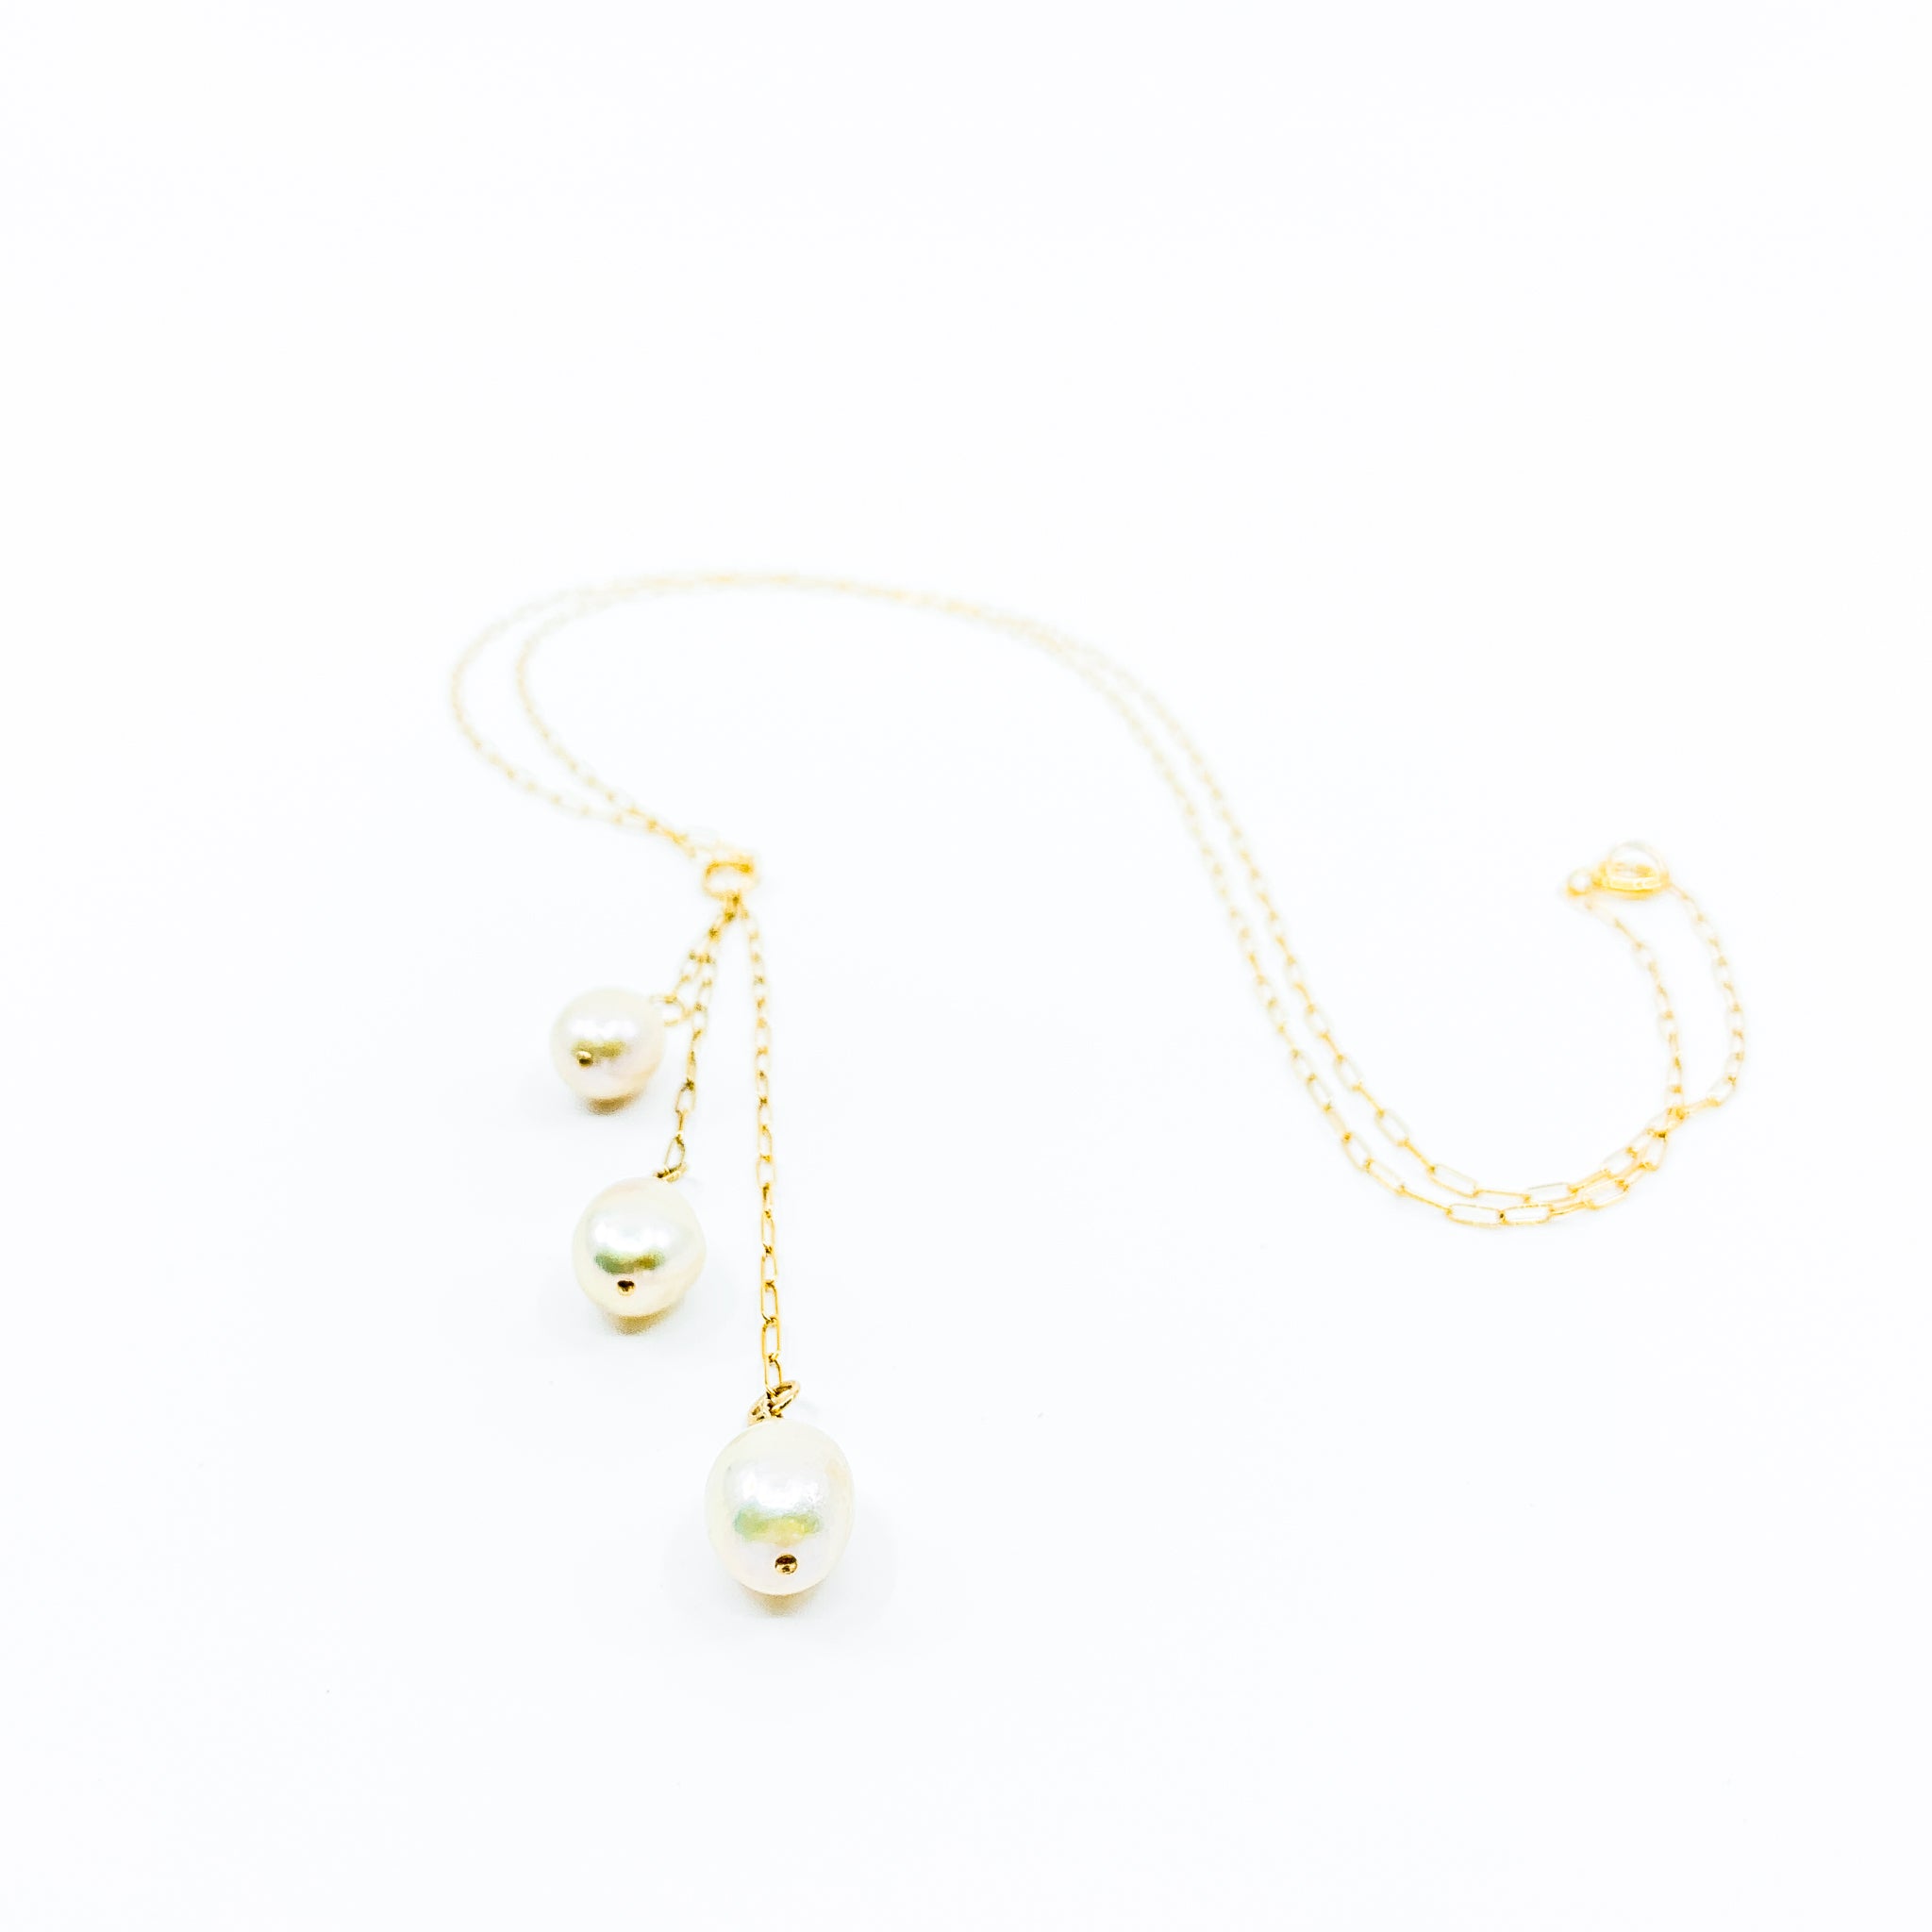 waterfall style gold necklace with 3 white pearls by eve black jewelry made in Hawaii  Edit alt text